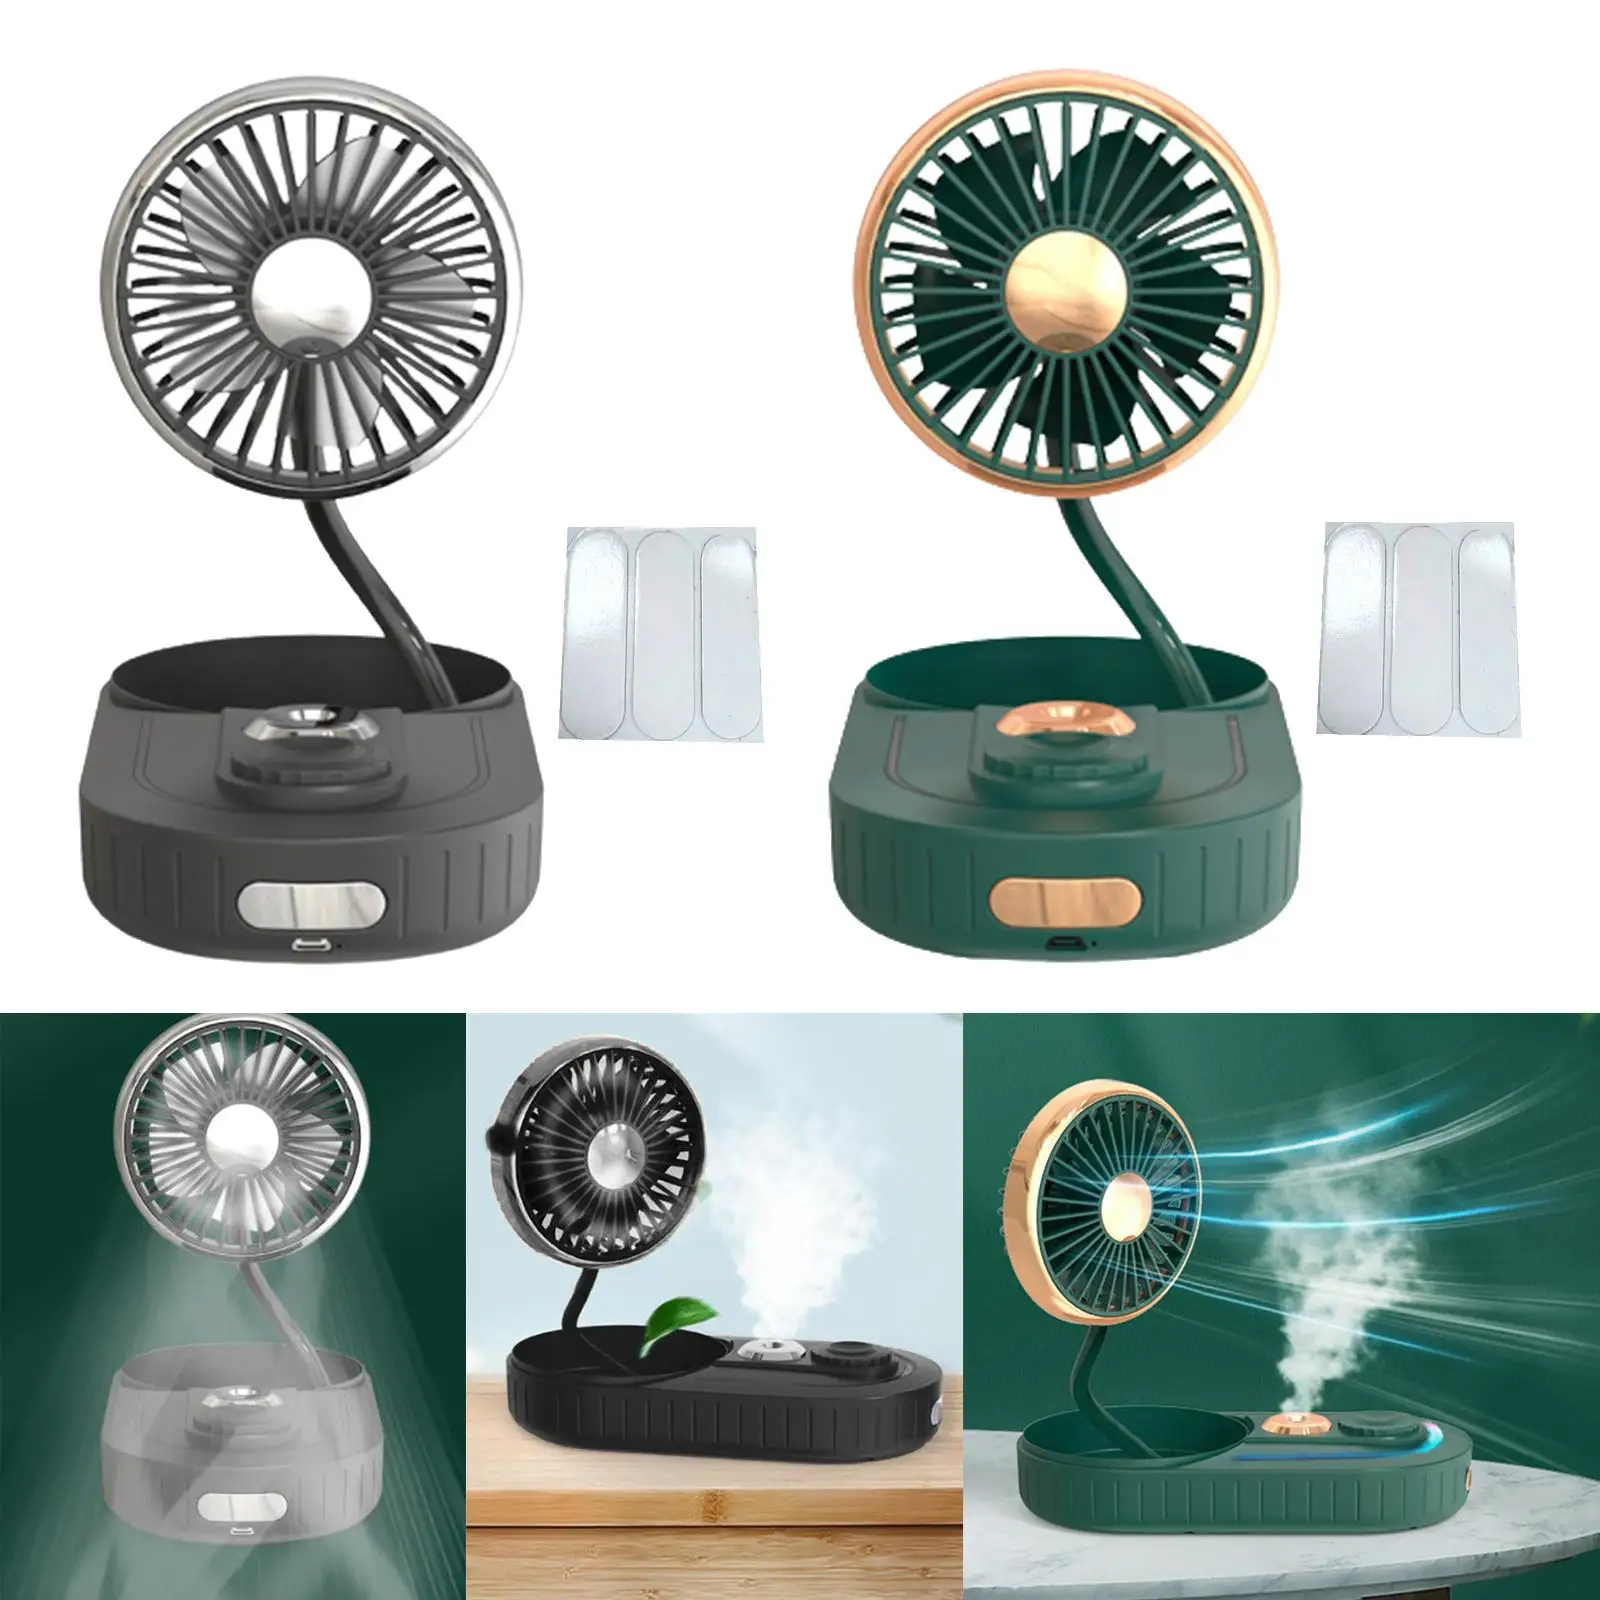 Multifunction USB Fan Humidifier Dashboard Adjustable Angle Fit for Office